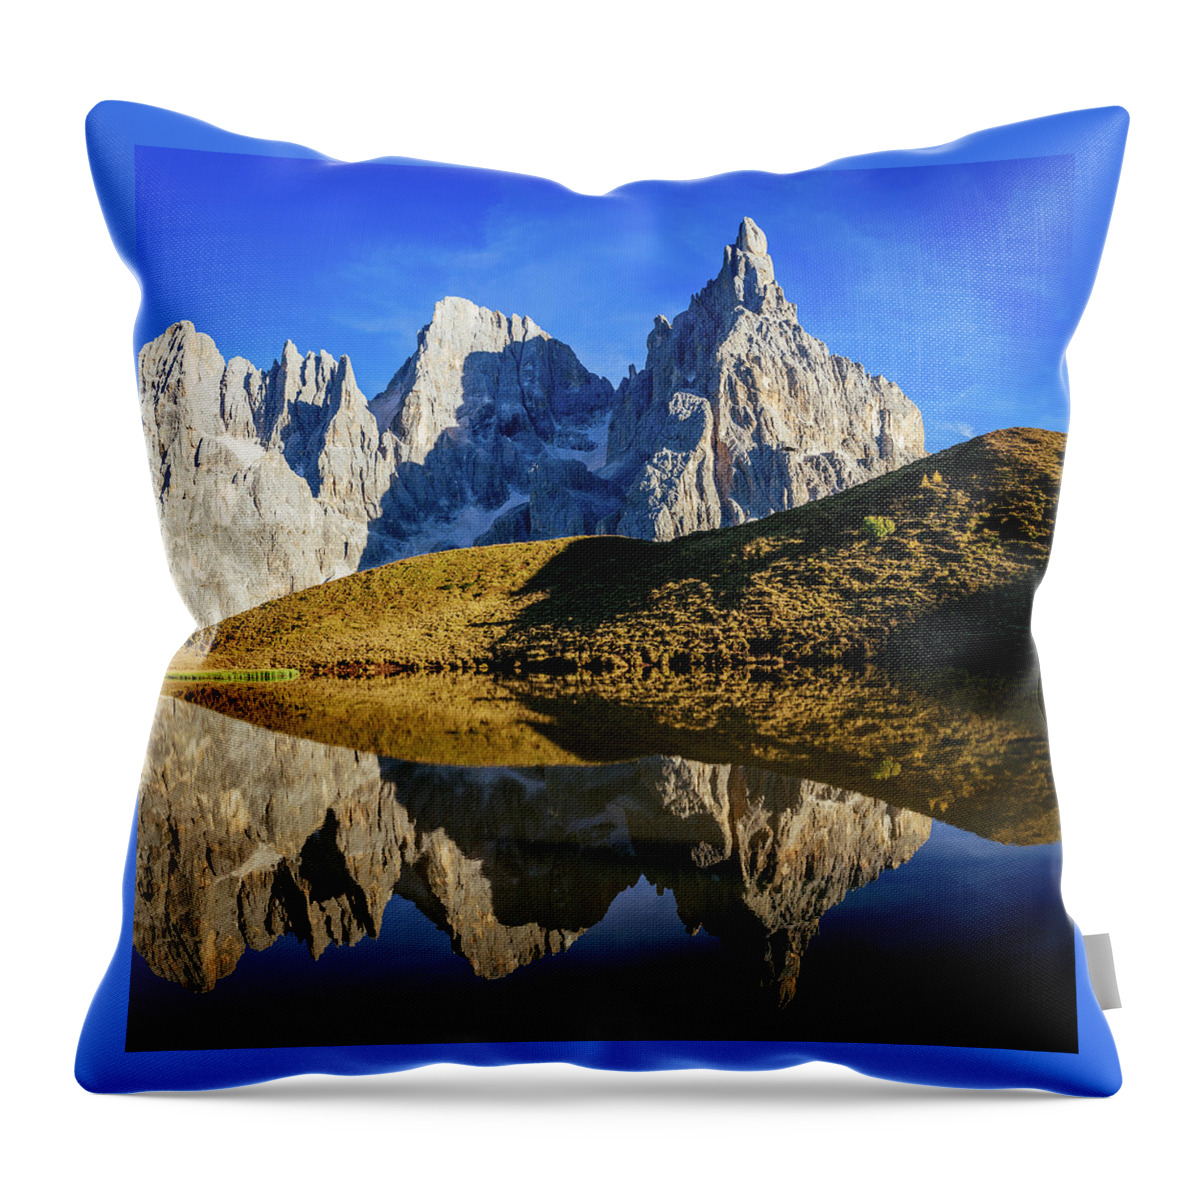 Blue Throw Pillow featuring the photograph Dolomites Reflecting by Francesco Riccardo Iacomino